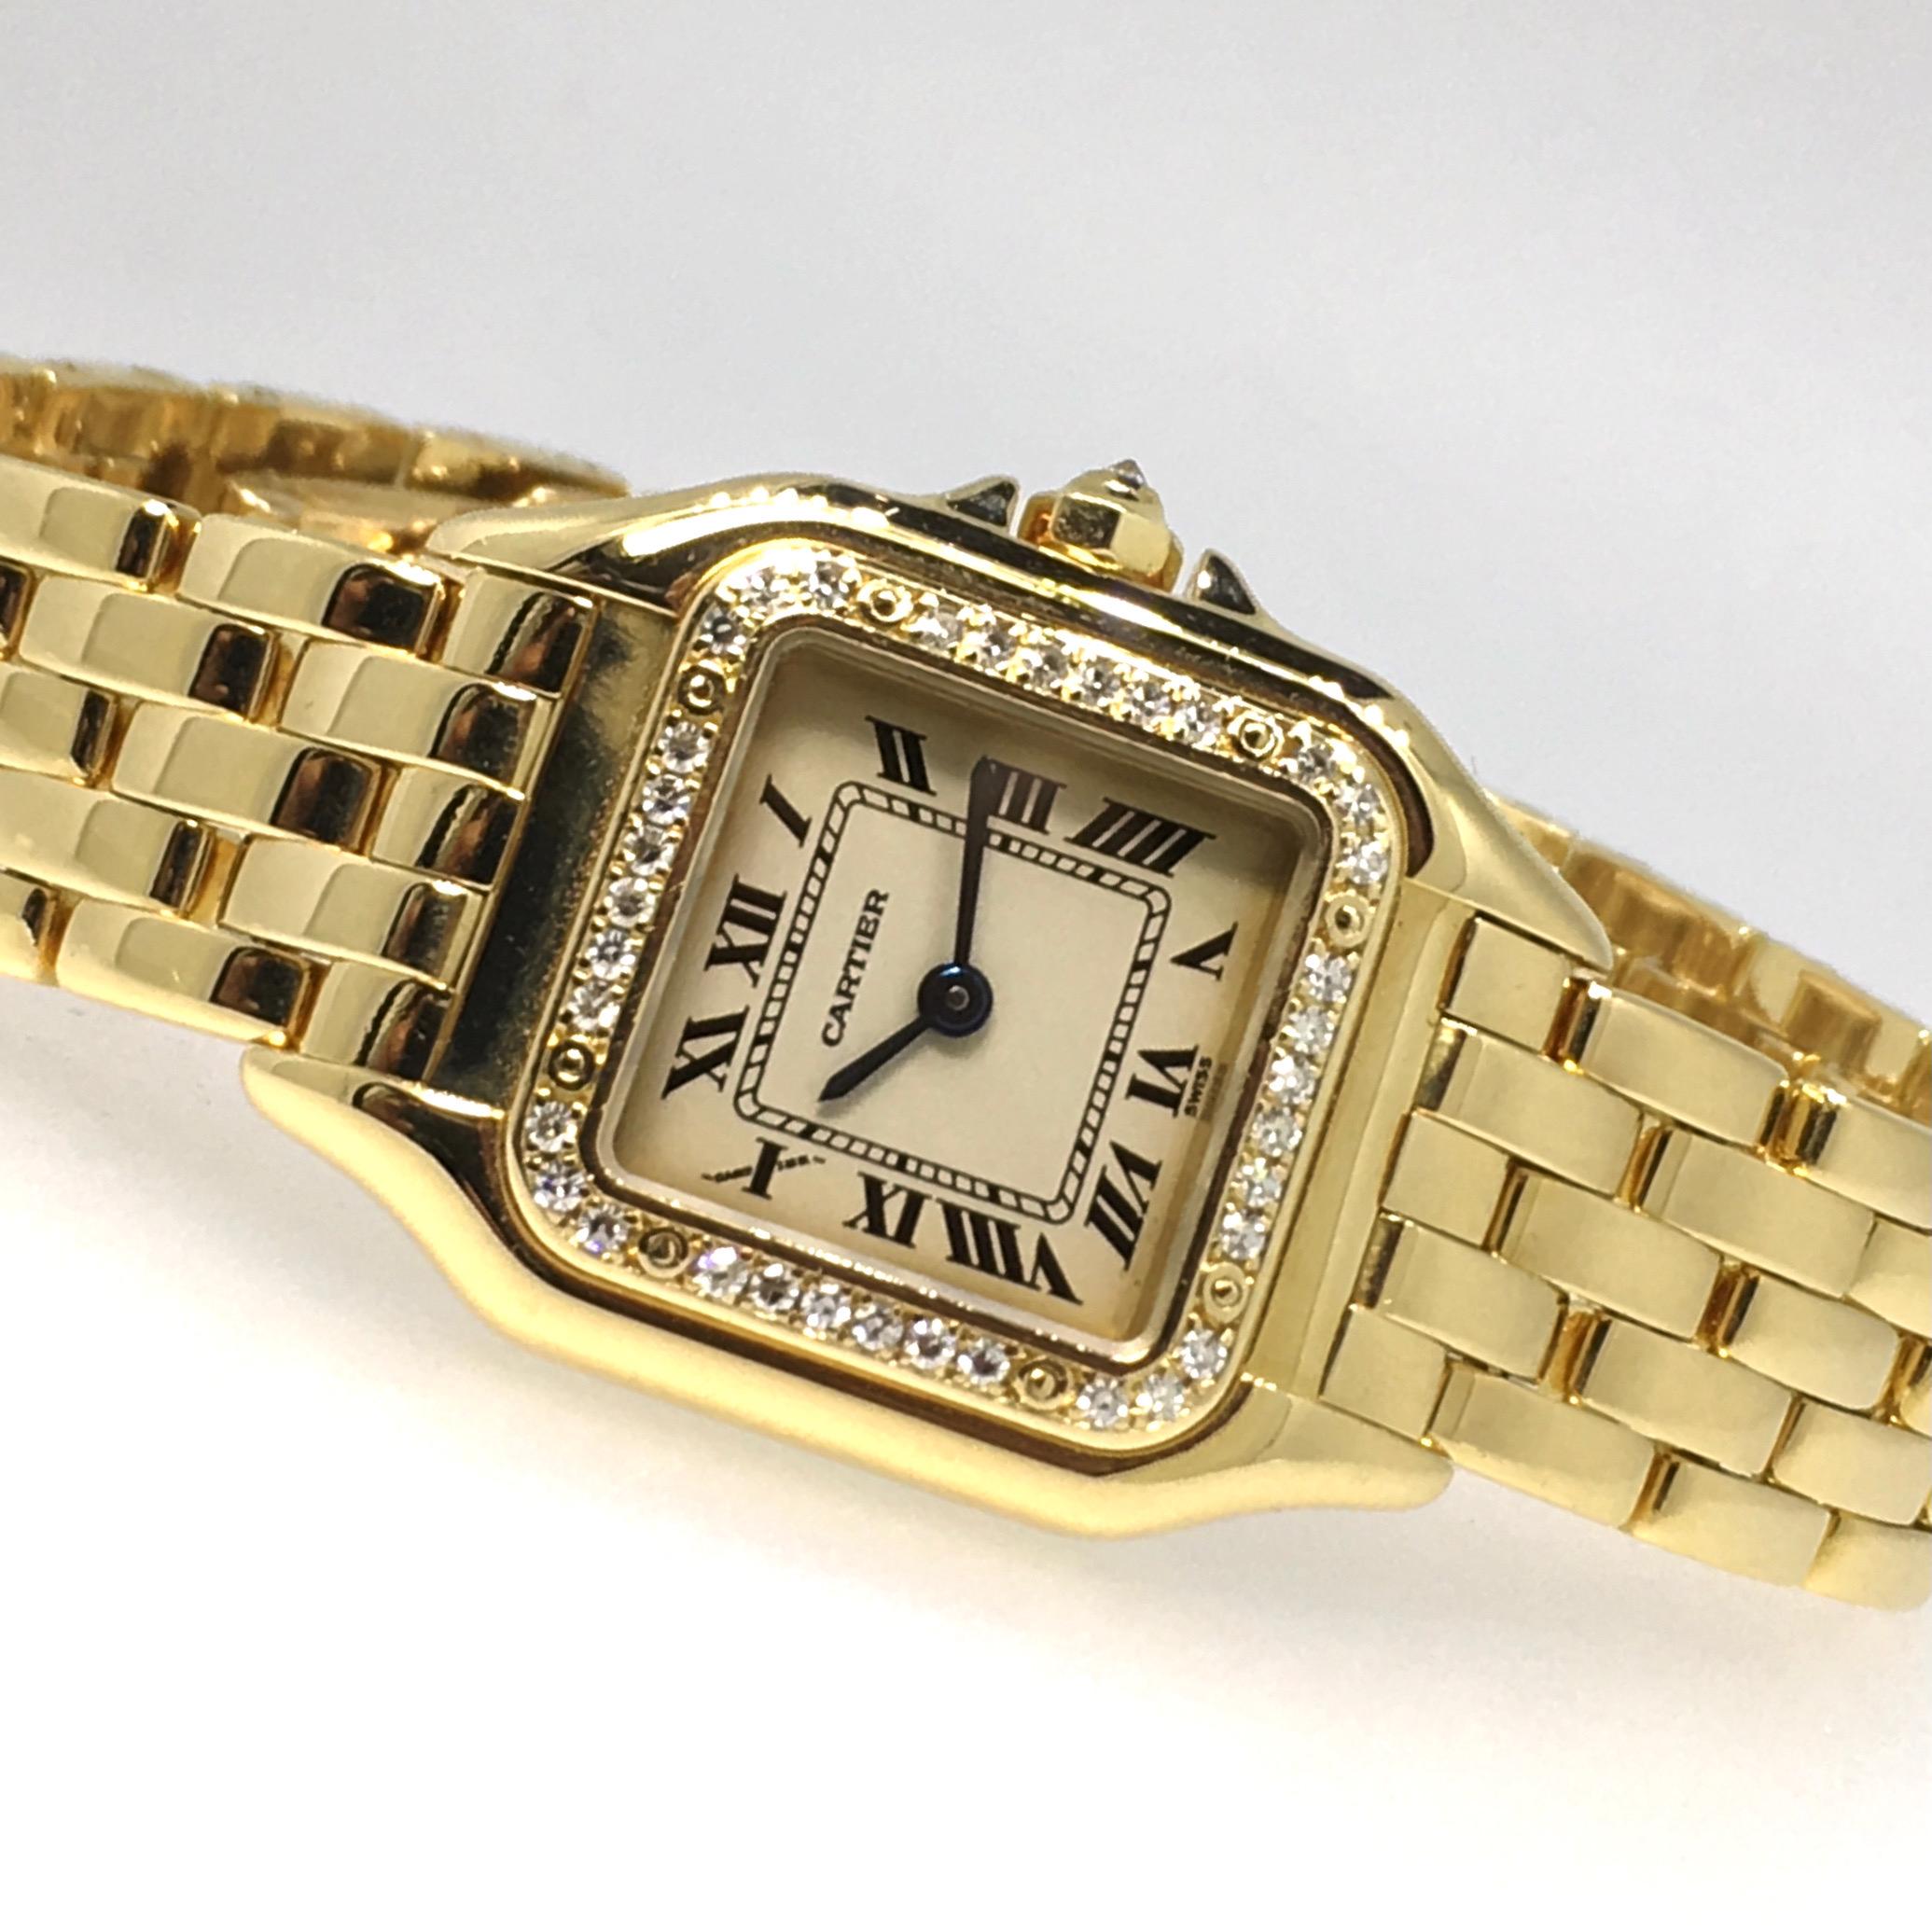 Cartier Panthère, Yellow Gold, Diamonds, reference 1280-2, in mint condition. 
There is really not much to explain about this watch, it is an iconic example of the Cartier Panthère collection. This watch was only worn on very rare occasions and was